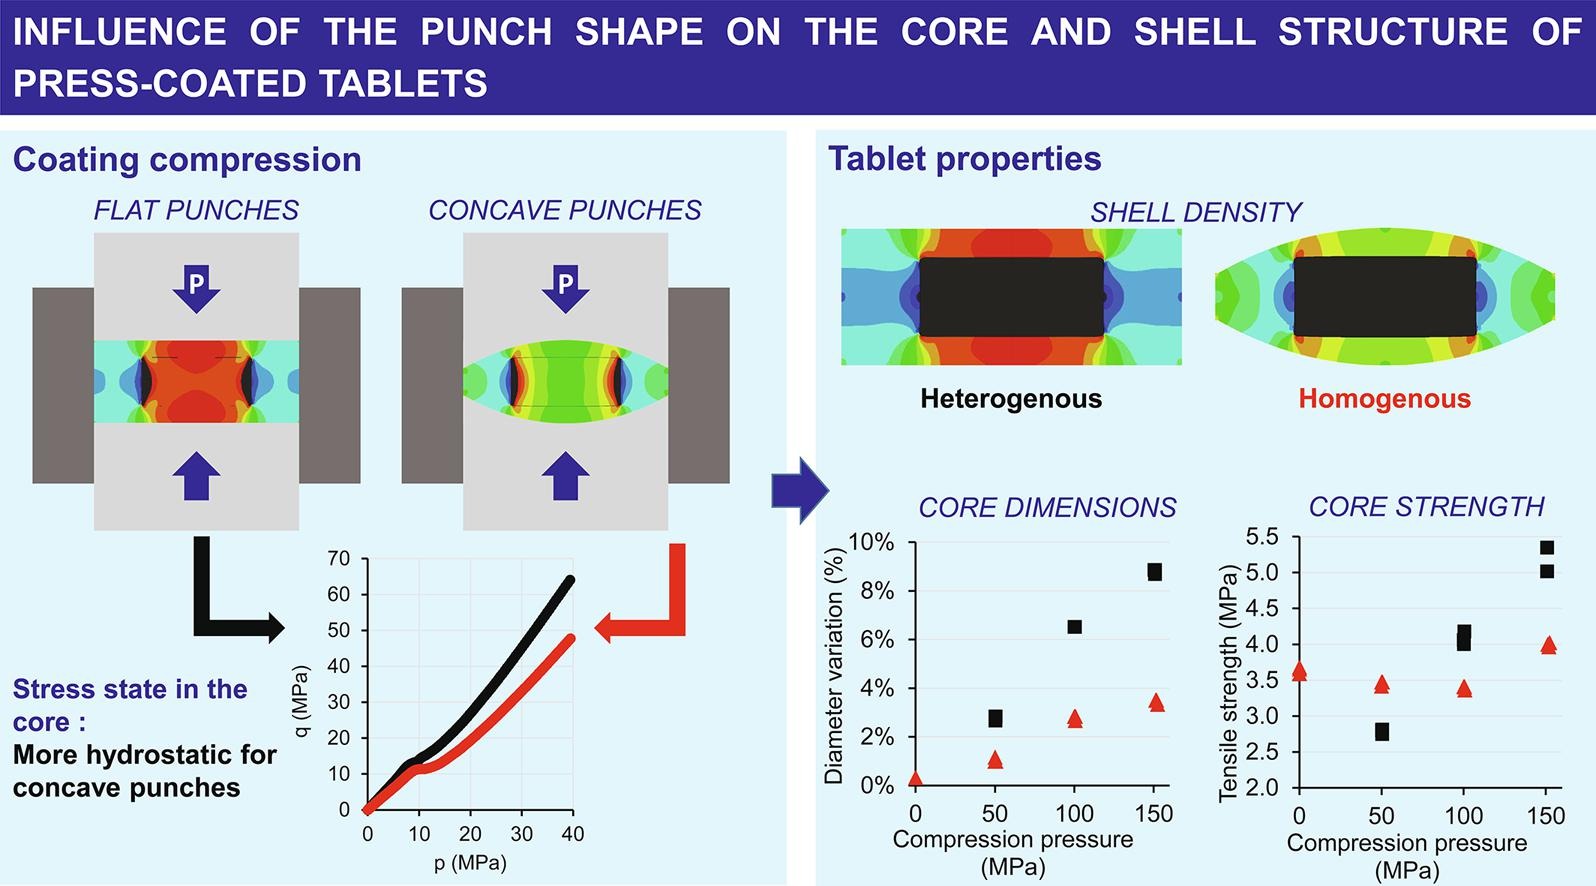 Influence of the punch shape on the core and shell structure of press-coated tablets